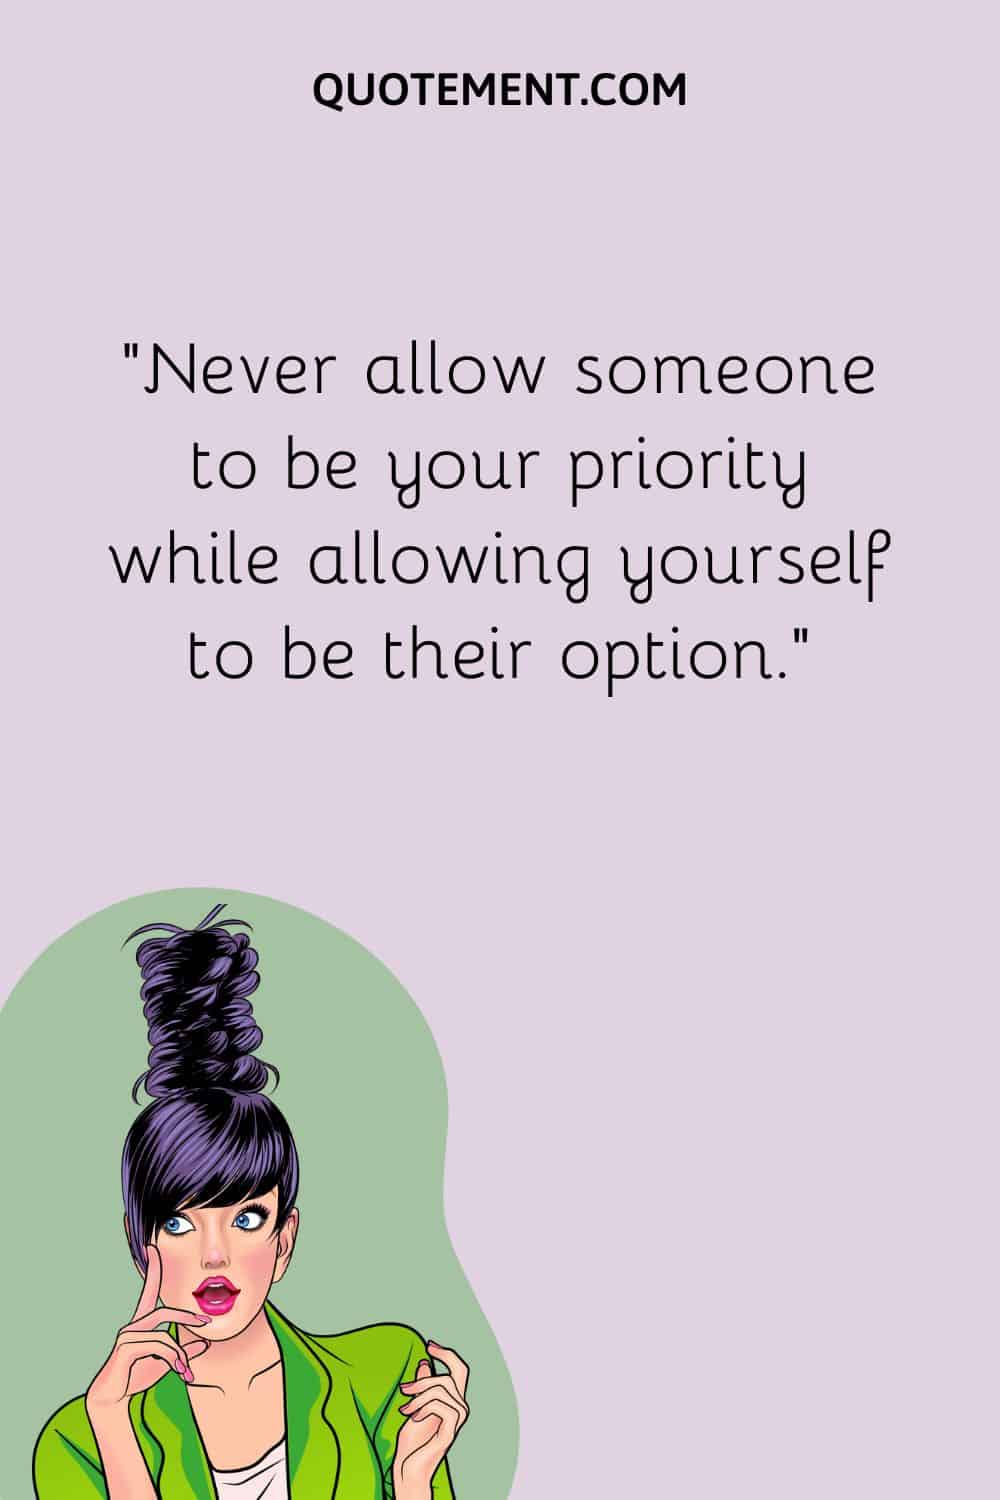 Never allow someone to be your priority while allowing yourself to be their option